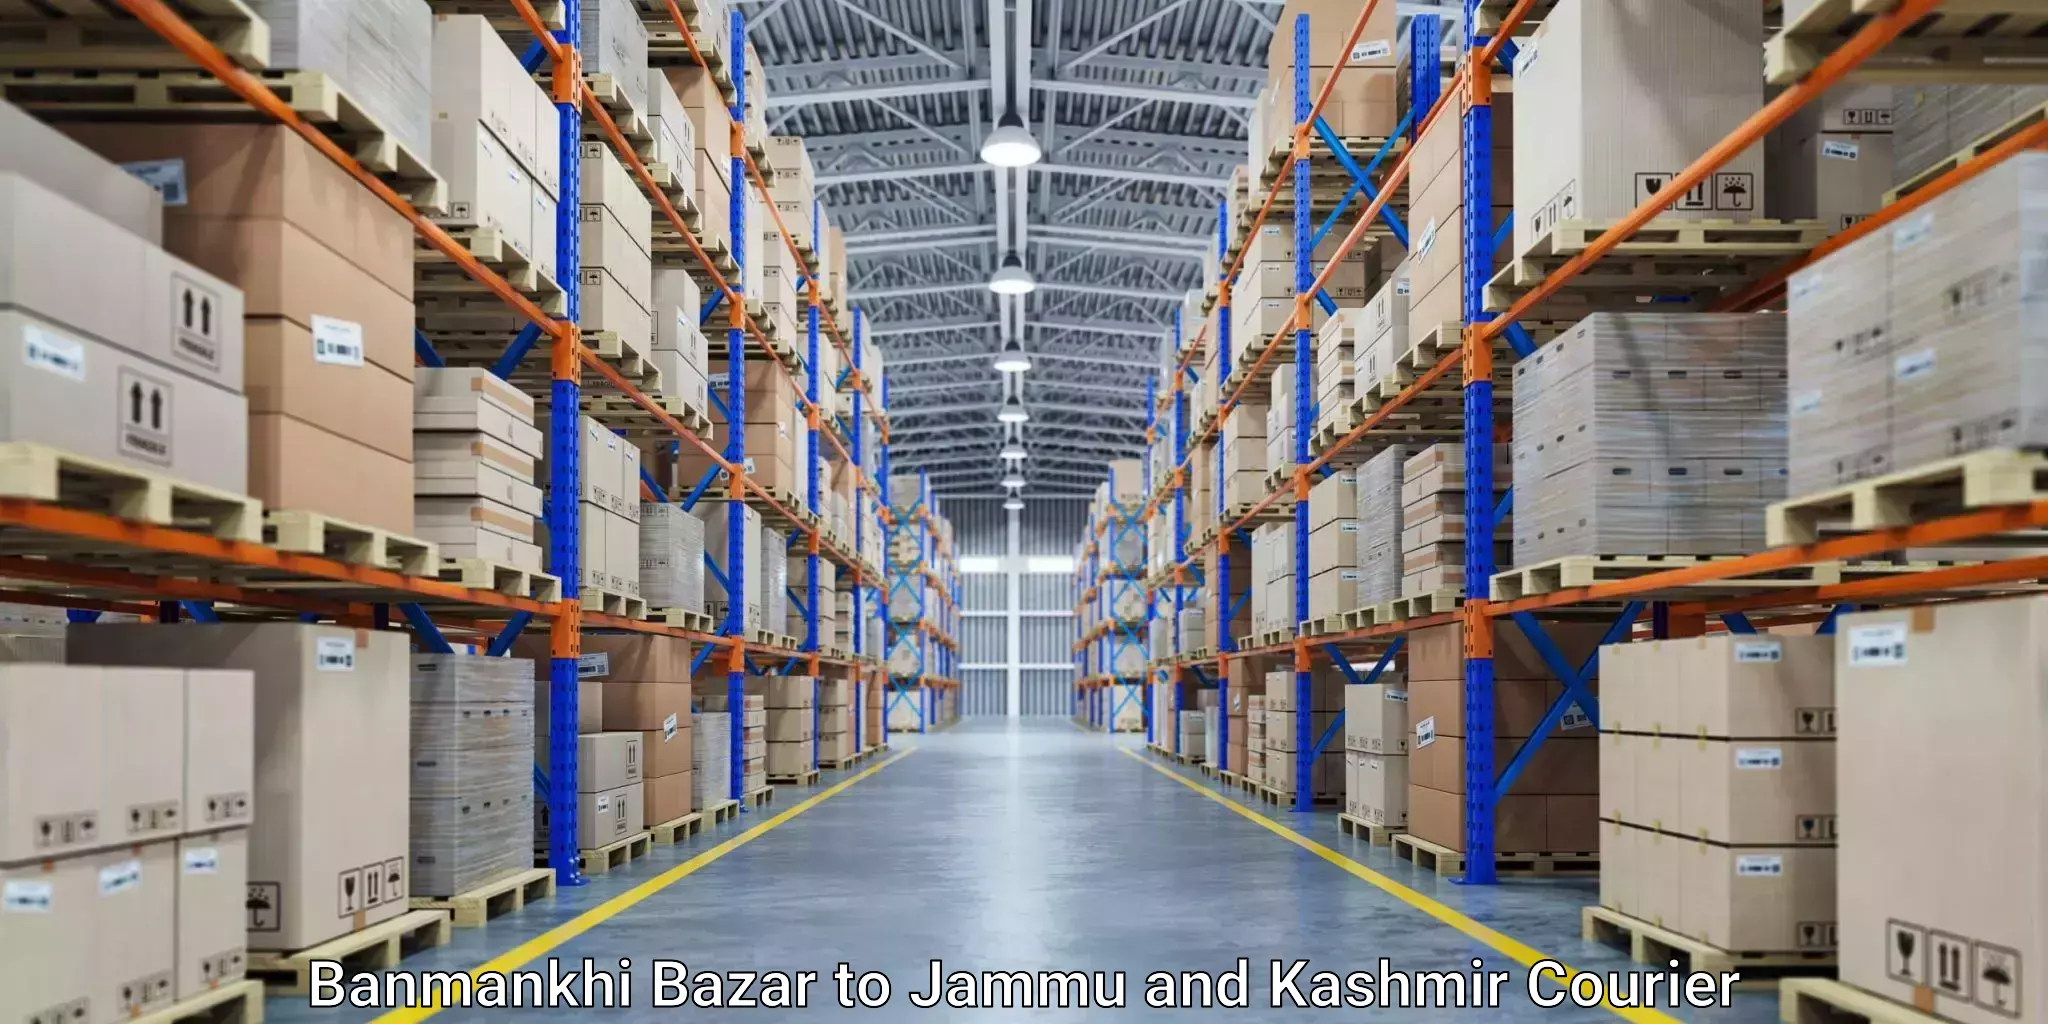 Express delivery capabilities Banmankhi Bazar to Jammu and Kashmir